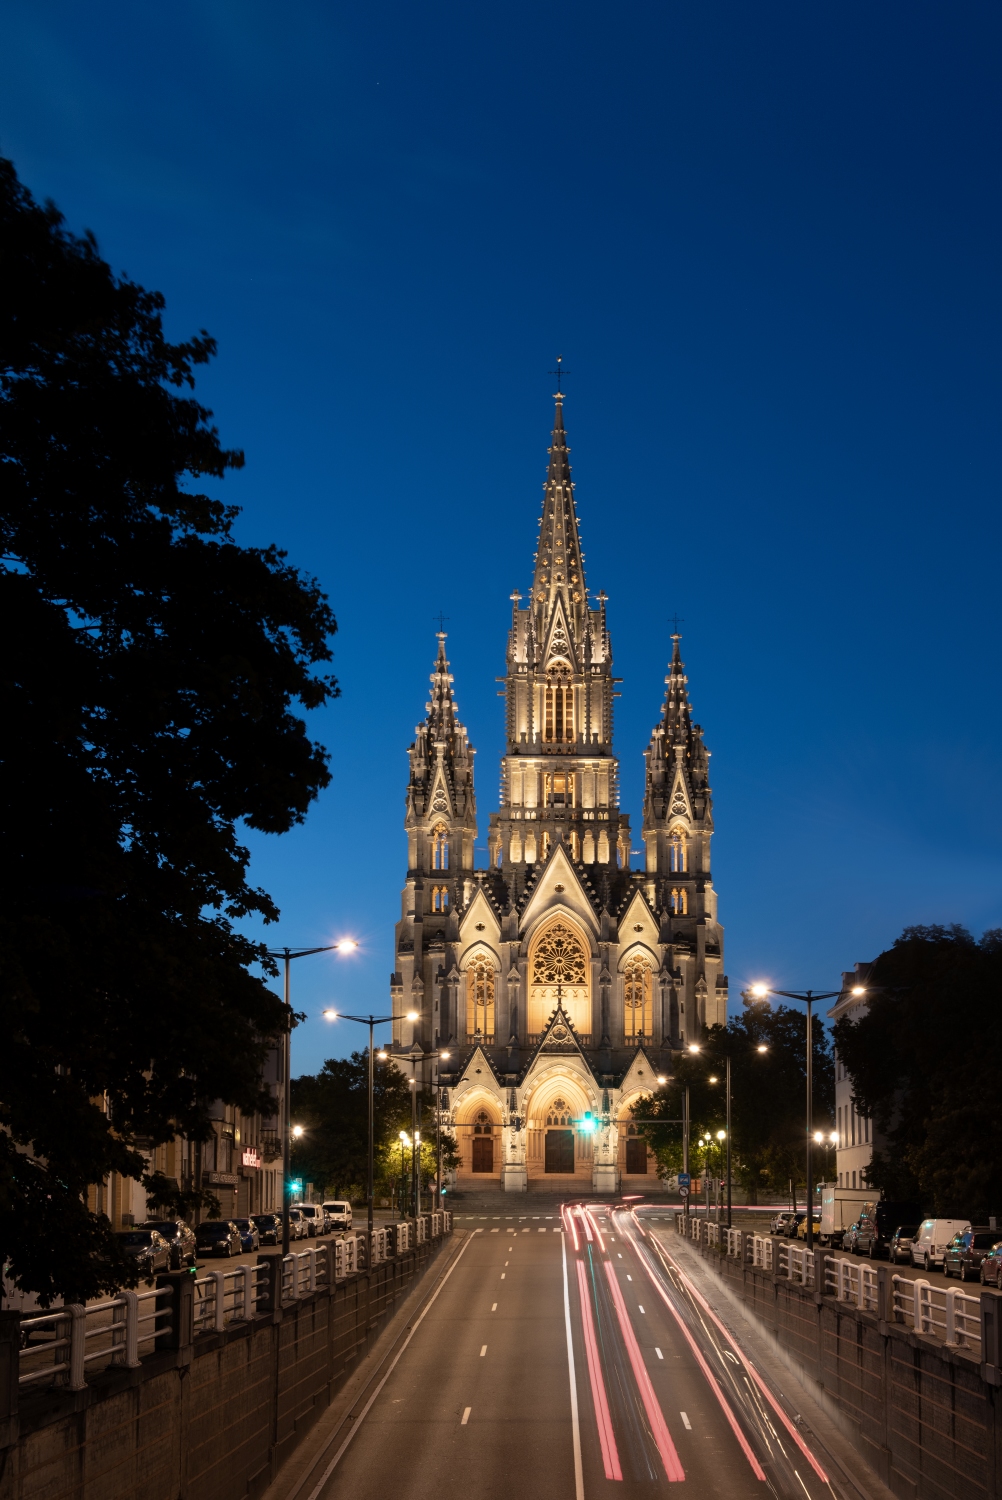 The Church of Our Lady of Laeken-02a.jpg